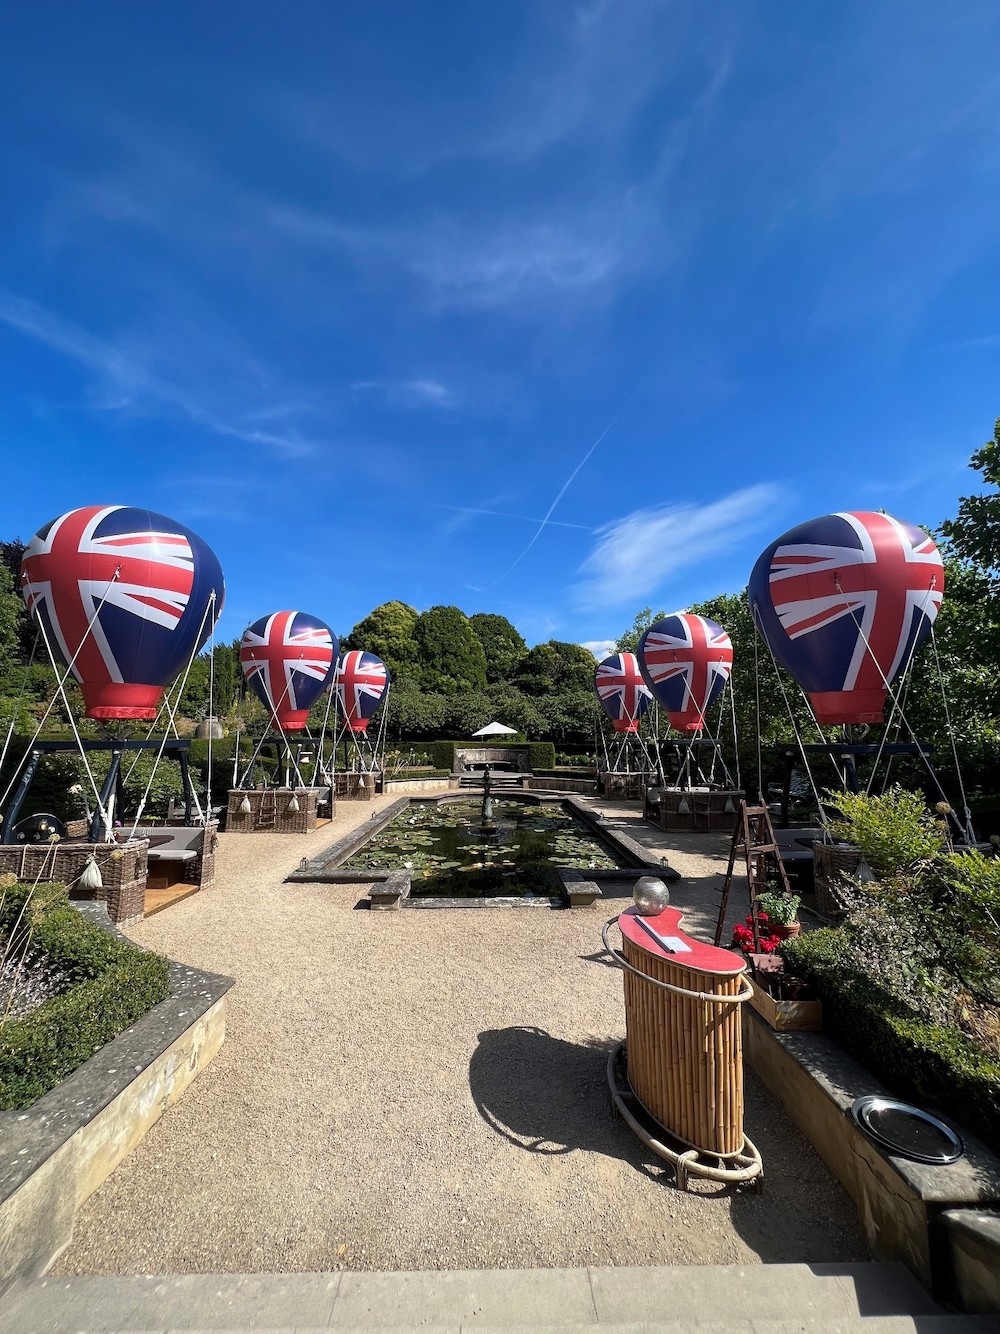 Union flag hot air balloons sat amongst outside dining